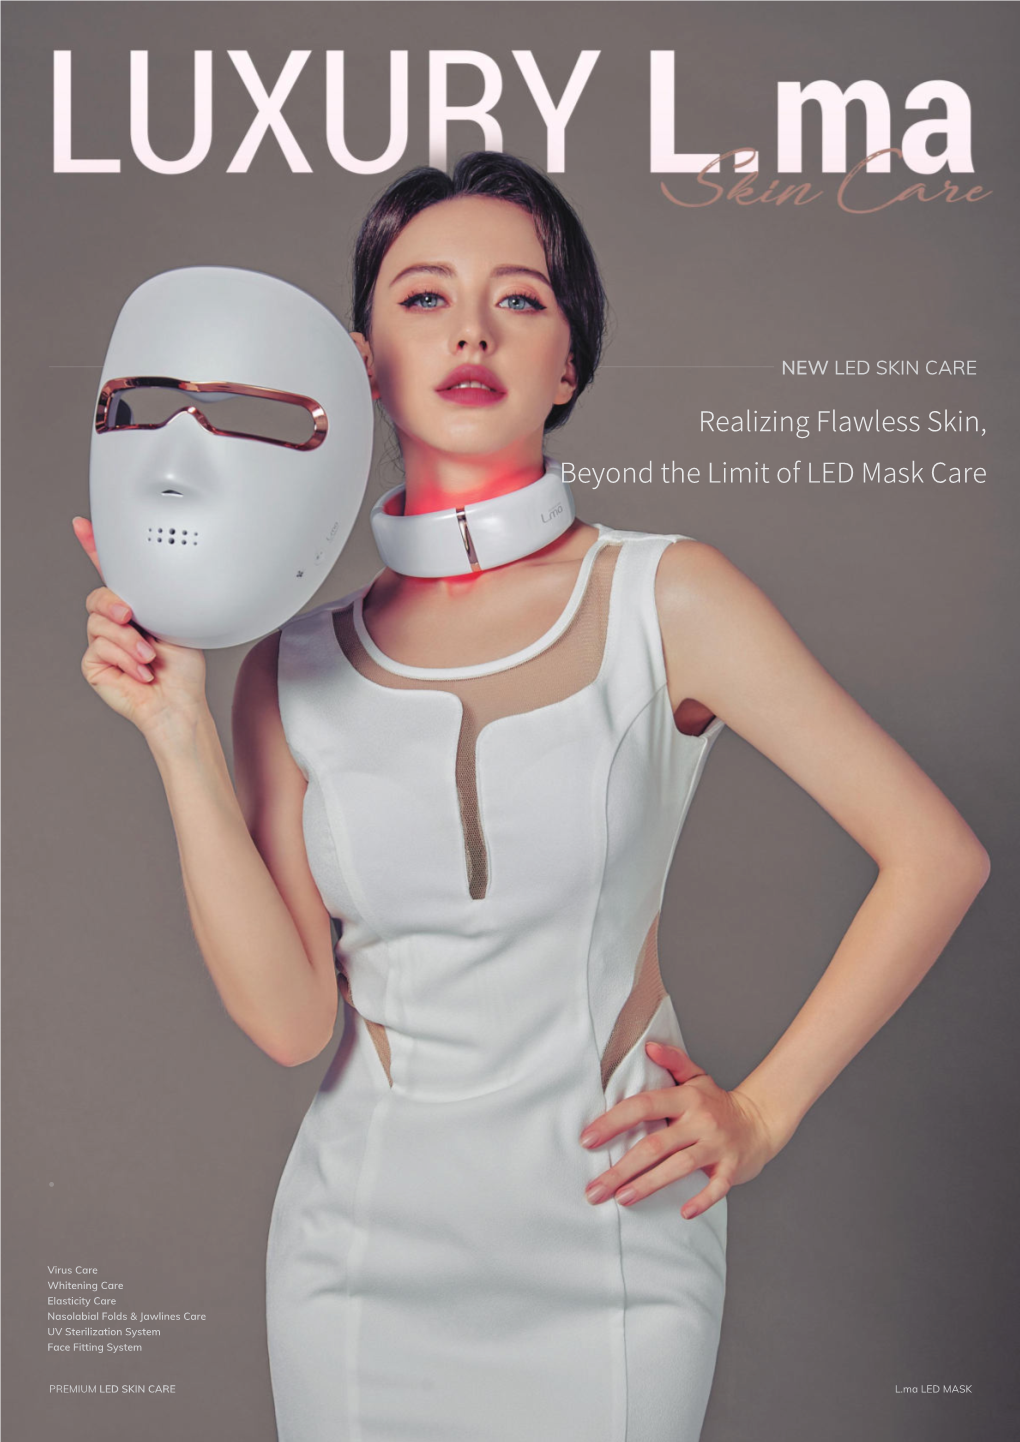 Realizing Flawless Skin, Beyond the Limit of LED Mask Care